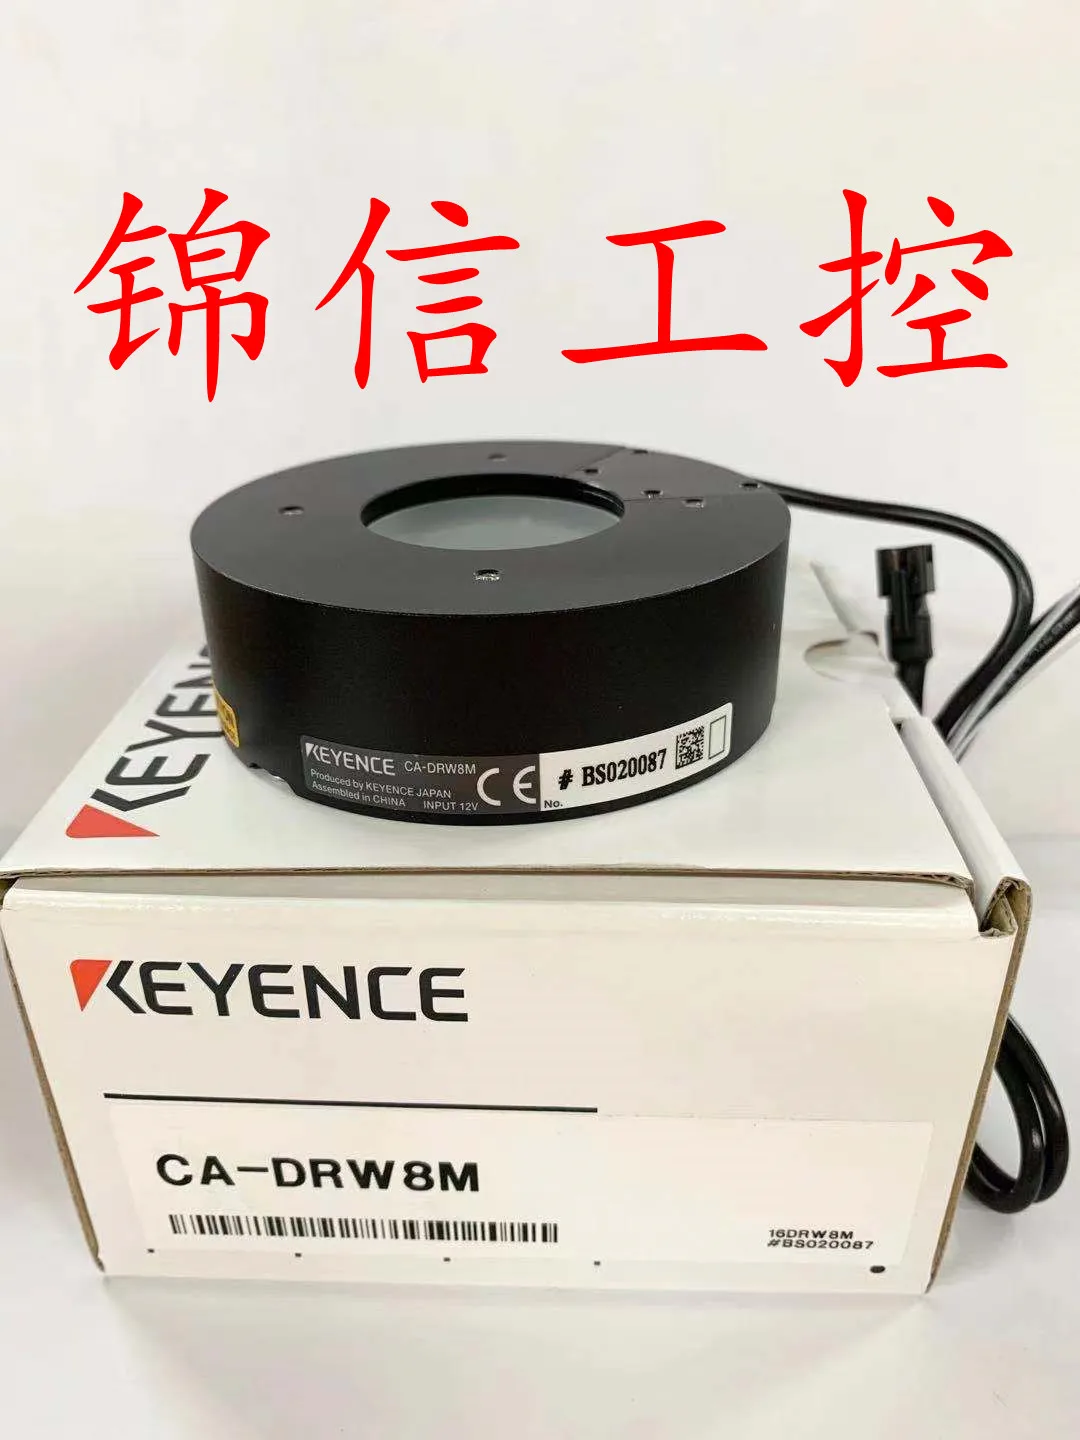 

New Original Genuine CA-DRW8M KEYENCE Ring Light Source Available In Stock